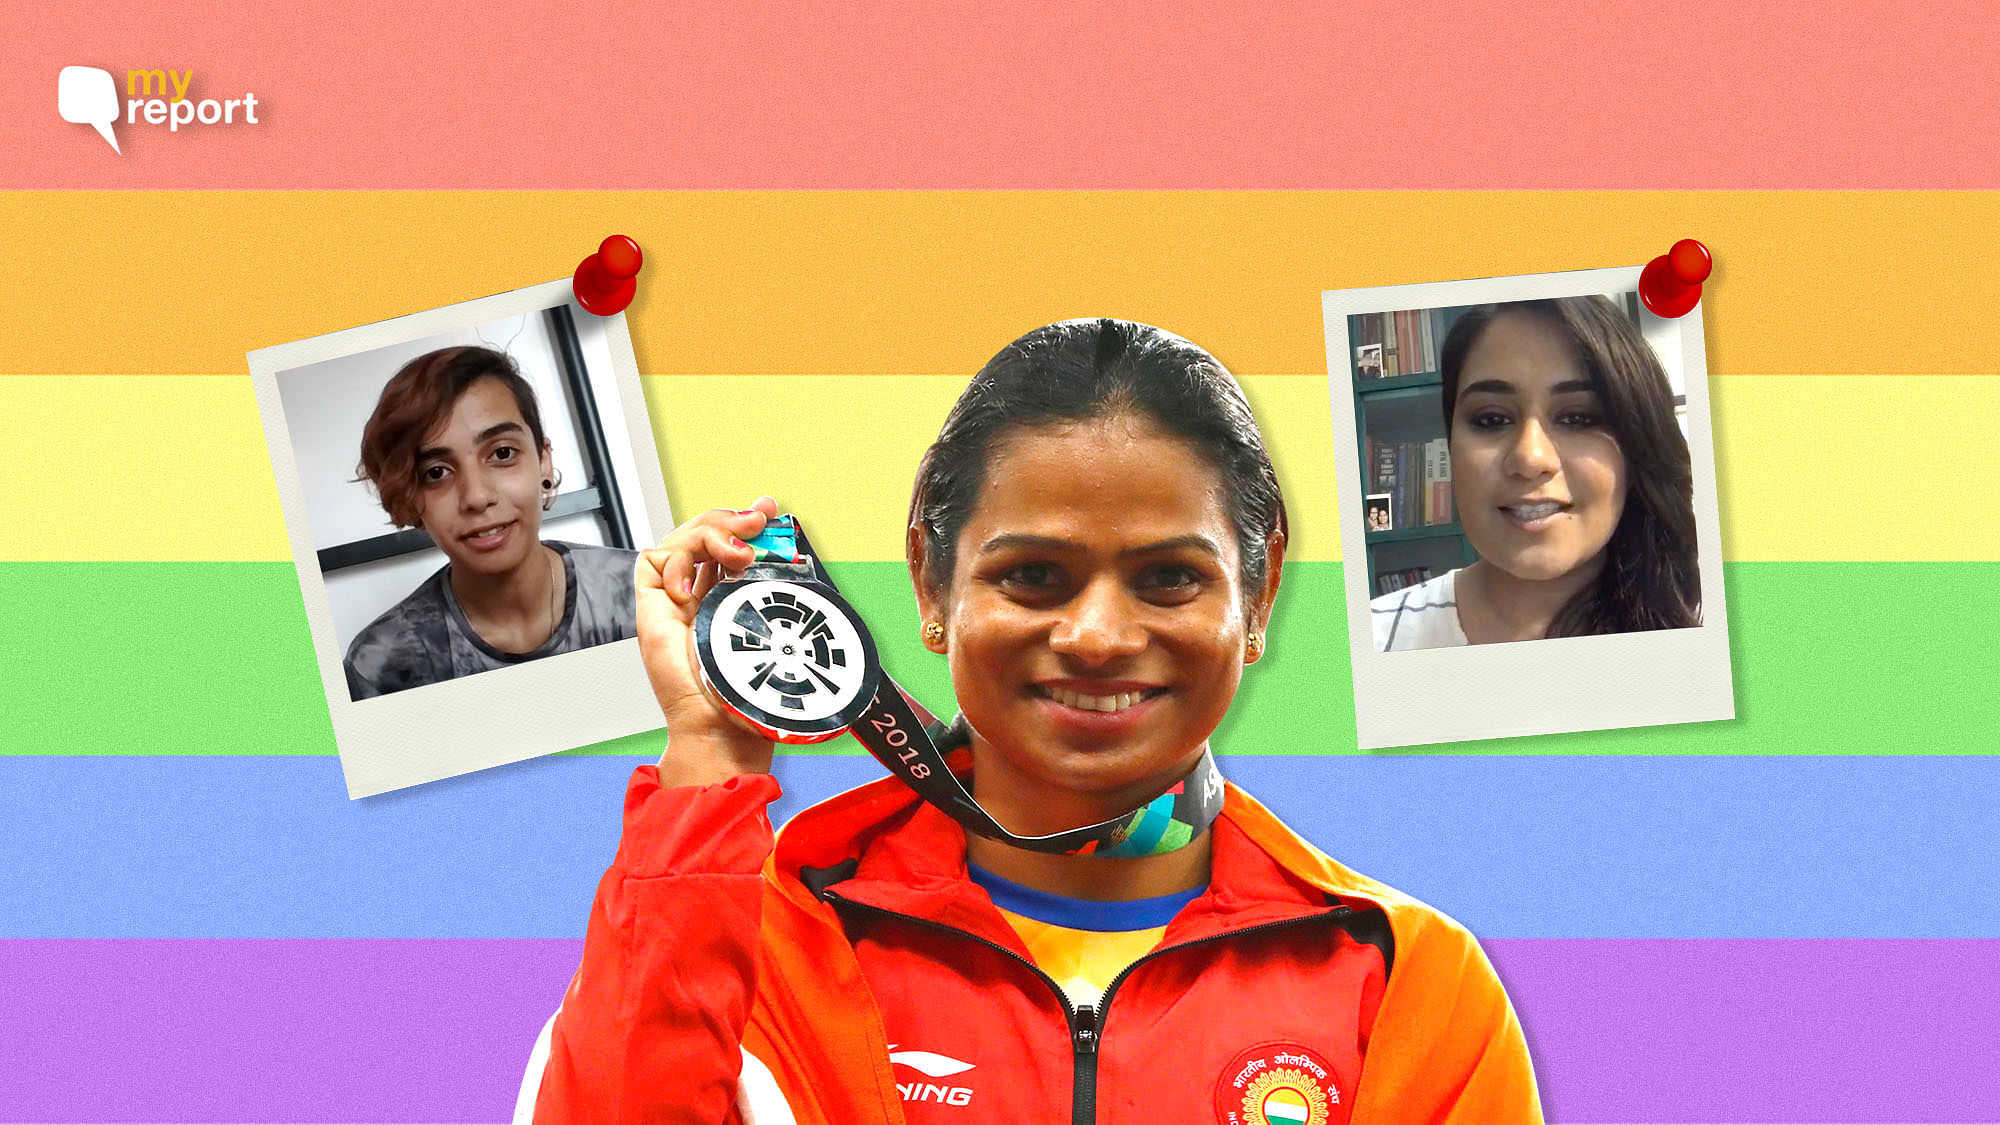 Dutee is the first Indian sports star who has publicly admitted to being in a same-sex relationship.